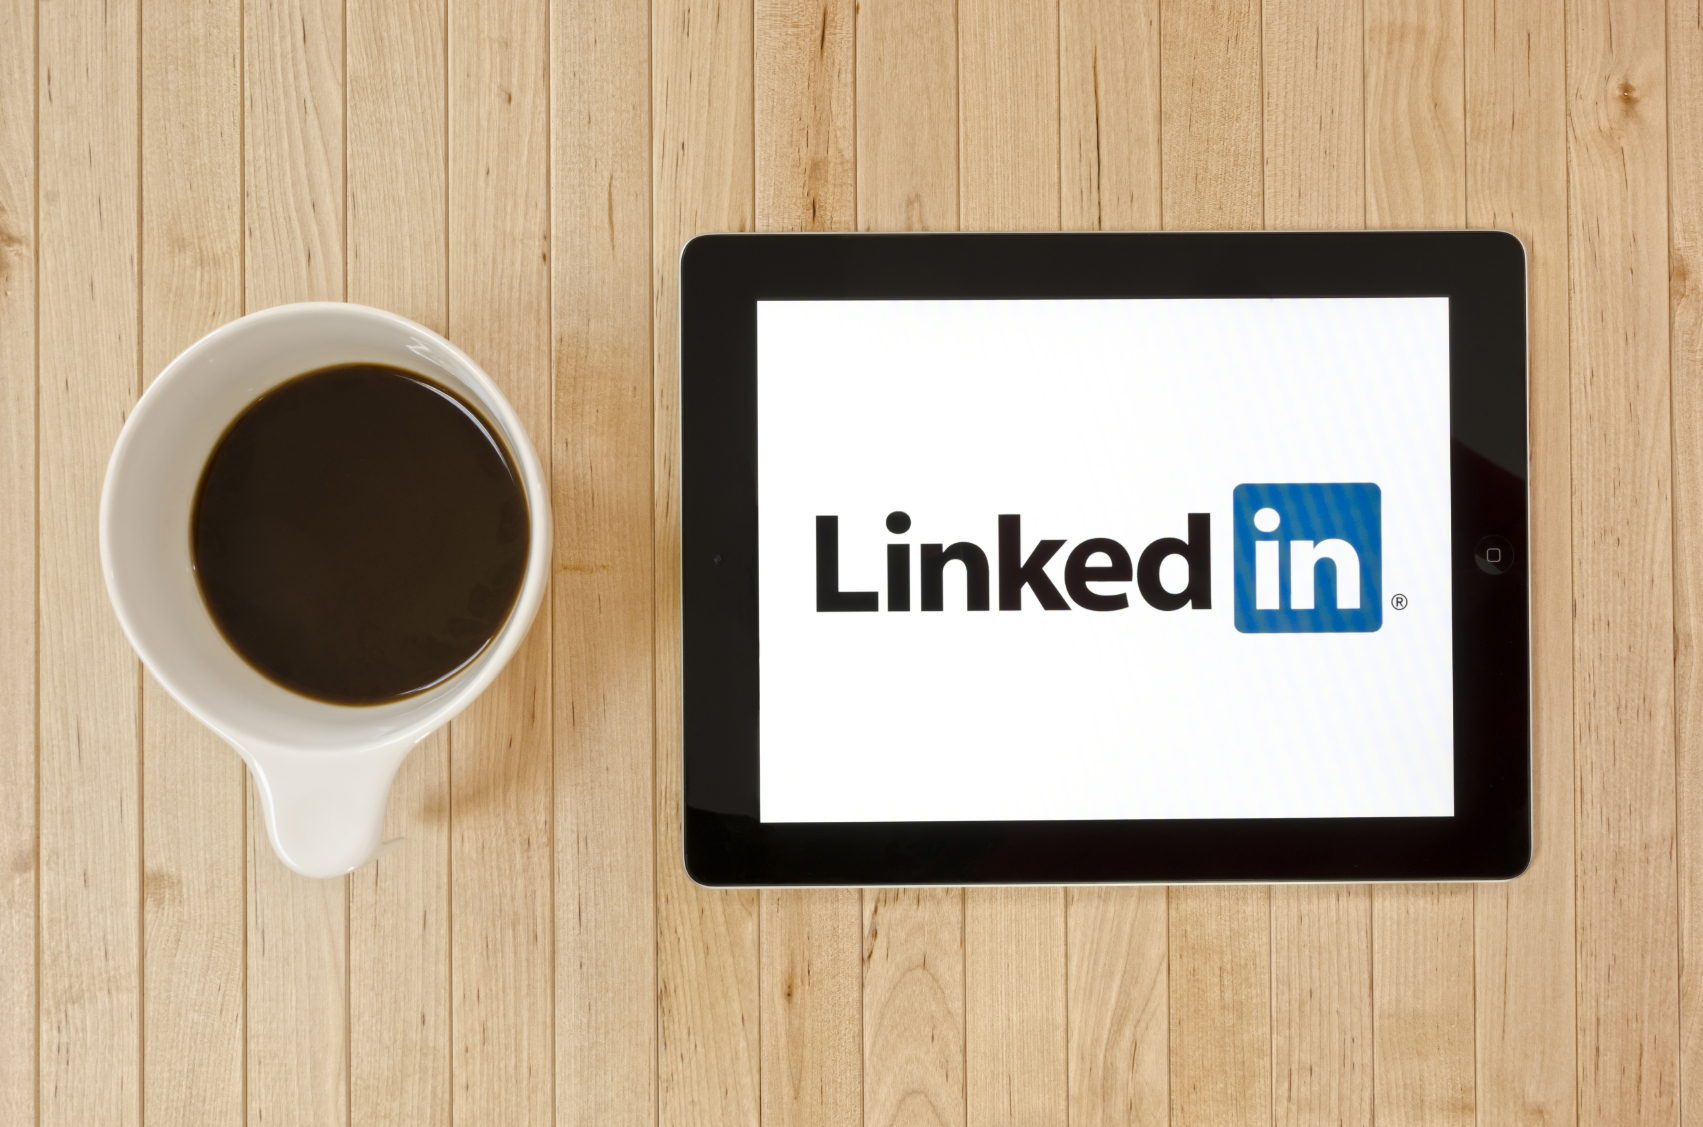 iOffice's Guide To LinkedIn Features Image